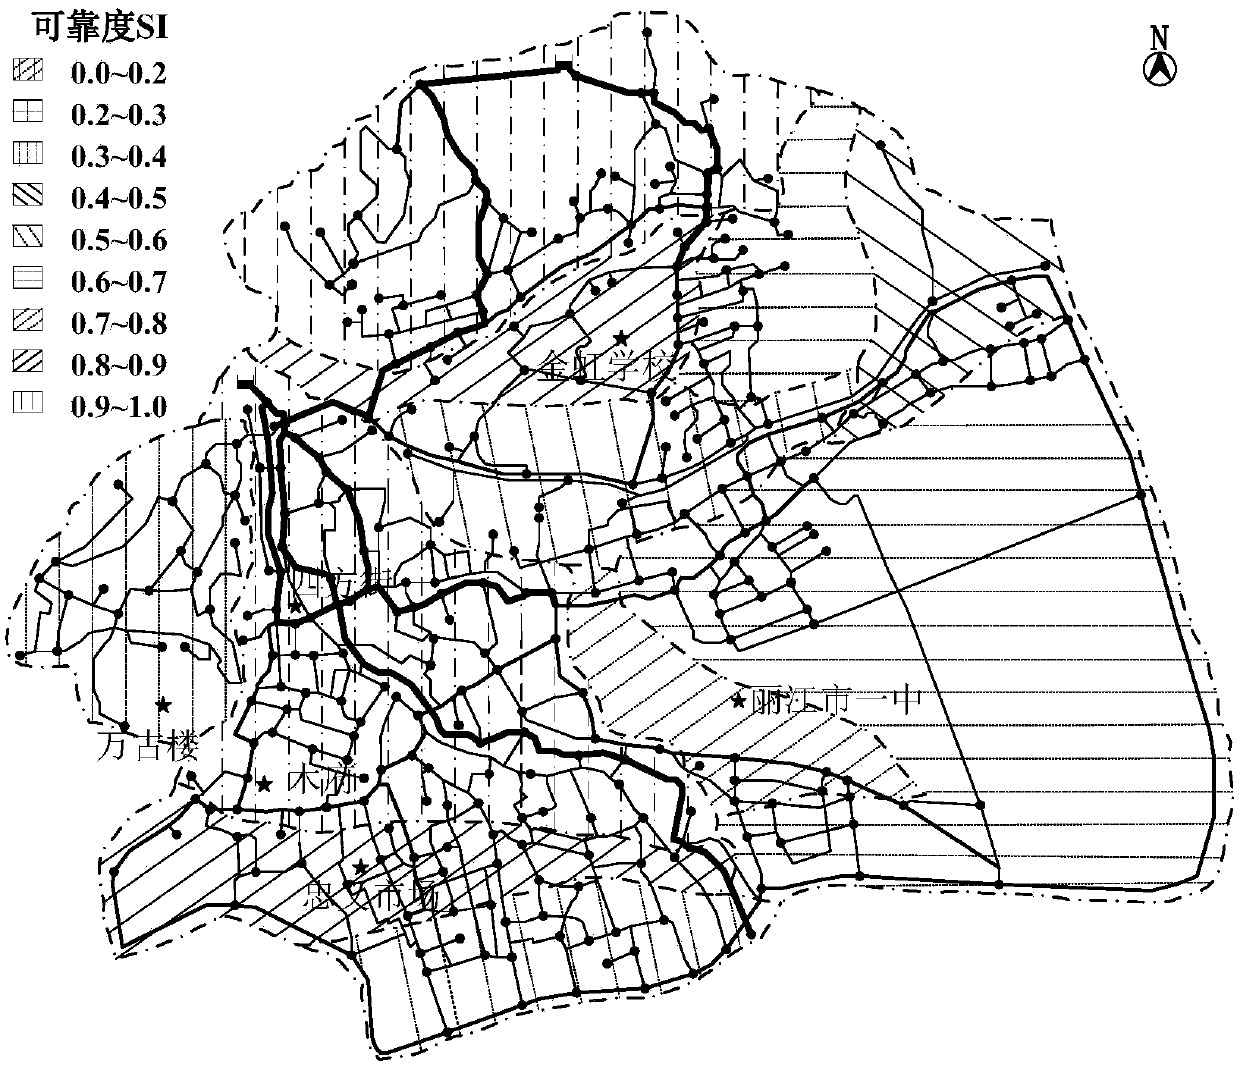 Stochastic simulation method for evaluating reliability of urban water supply network